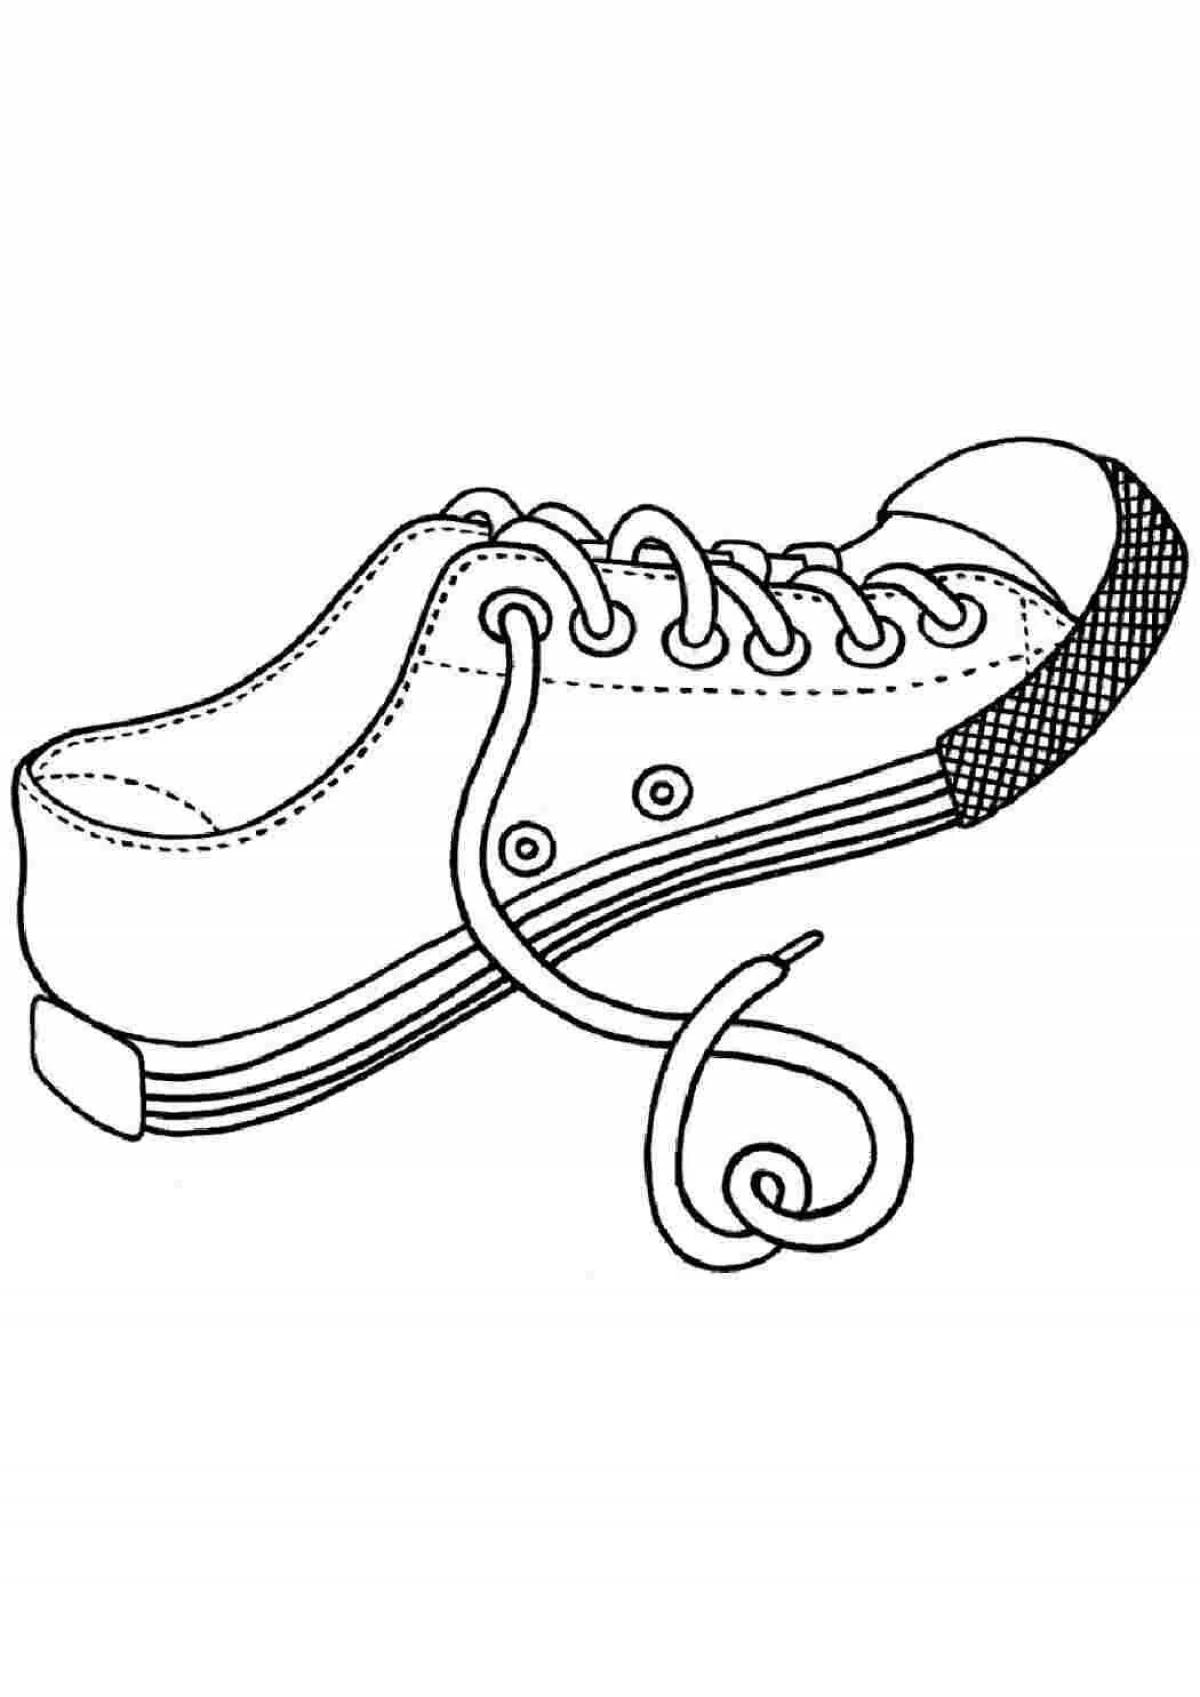 Great shoe coloring book for 4-5 year olds